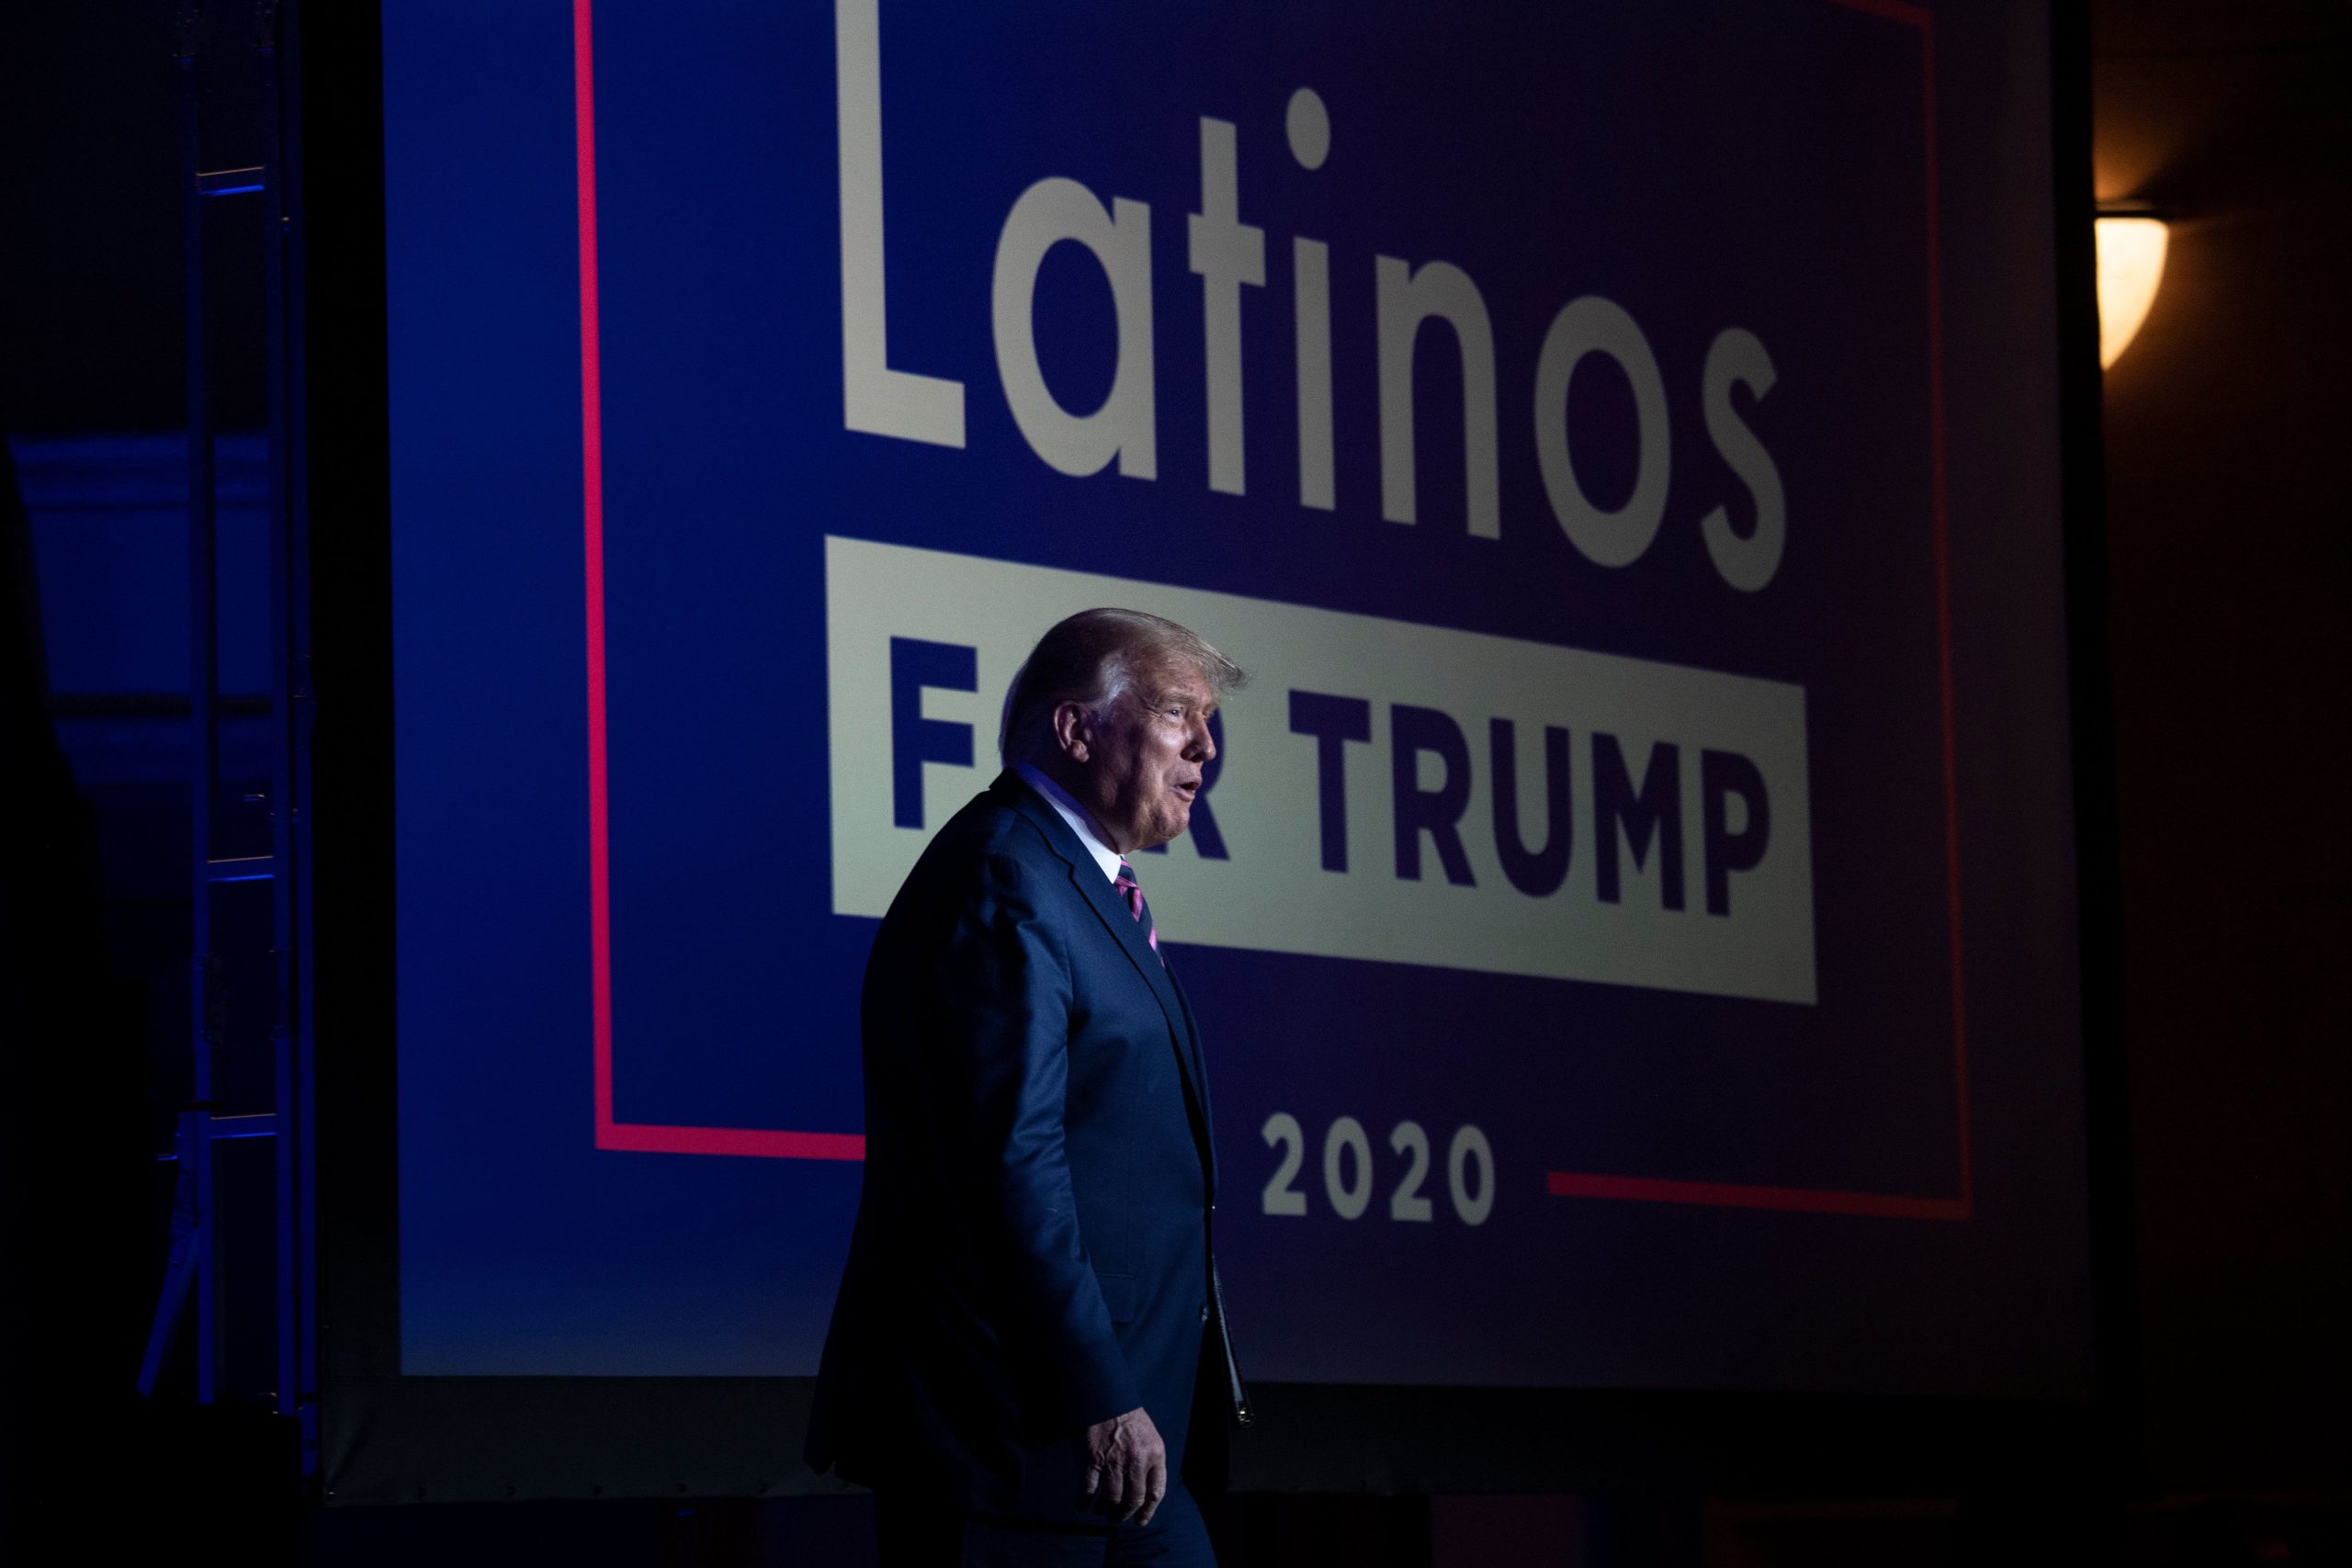 US President Donald Trump arrives for a roundtable rally with Latino supporters at the Arizona Grand Resort and Spa in Phoenix, Arizona on September 14, 2020. (Photo by Brendan Smialowski / AFP) (Photo by BRENDAN SMIALOWSKI/AFP via Getty Images)